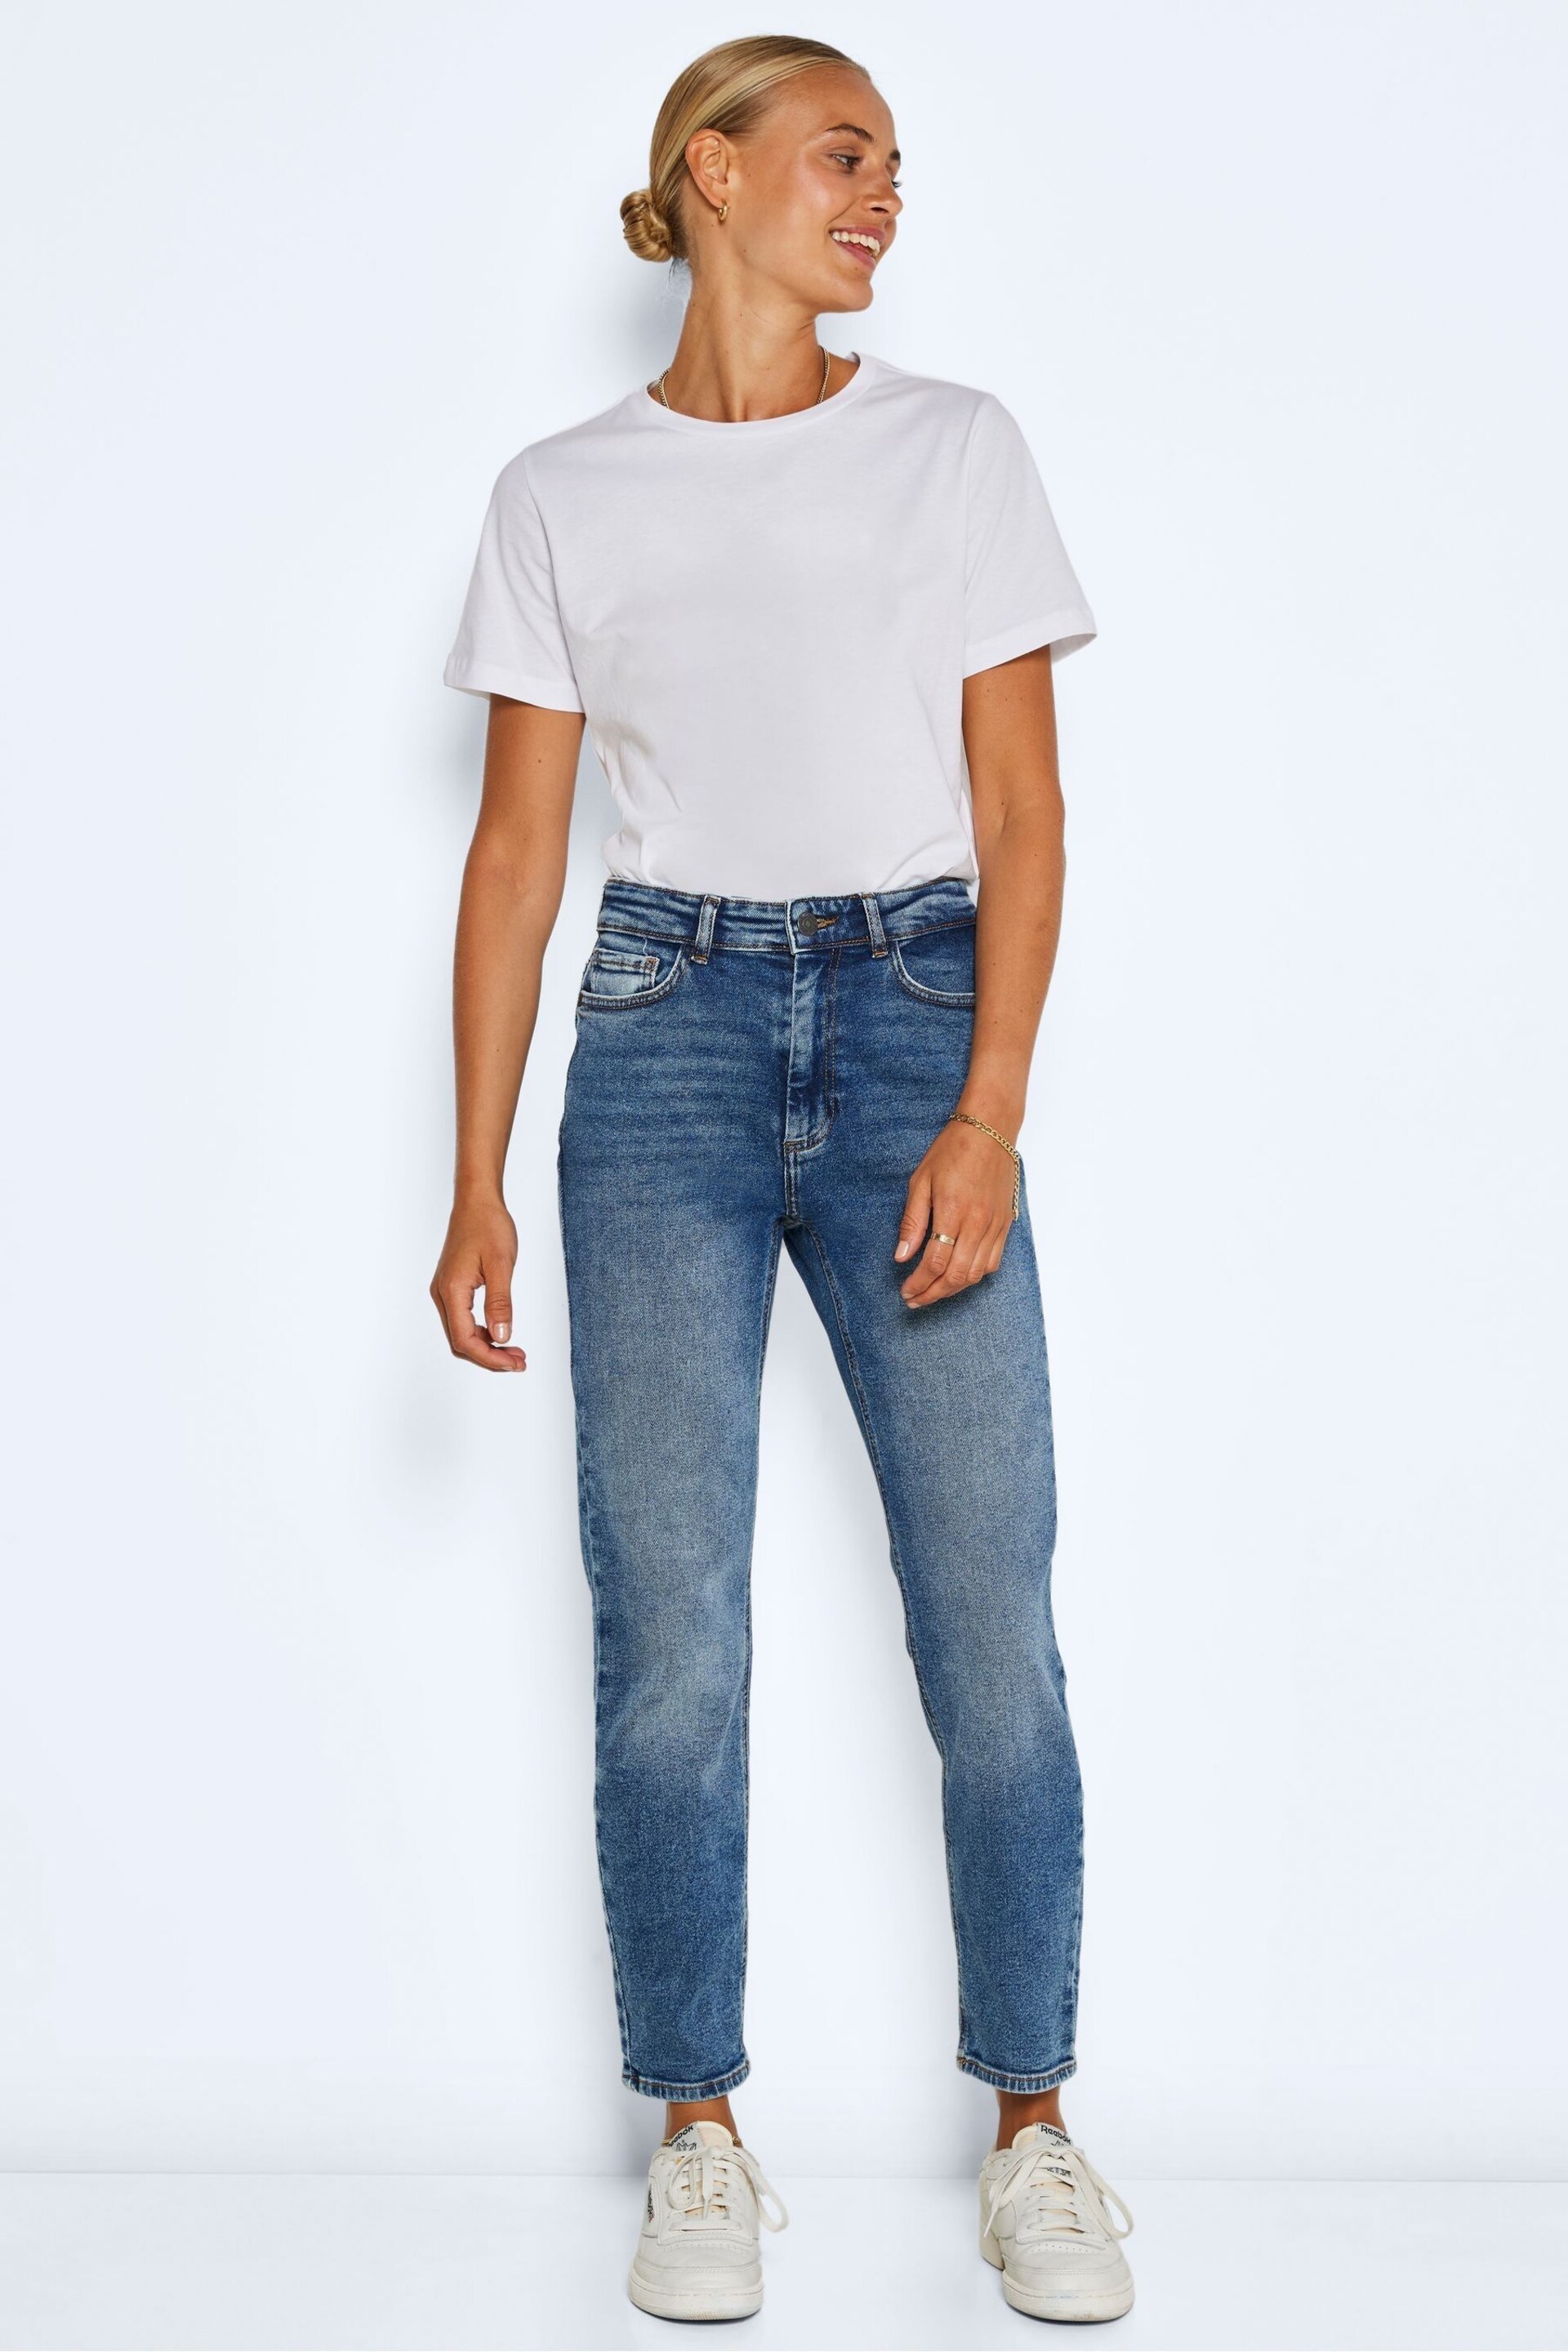 NOISY MAY Blue High Waisted Straight Leg Jeans - Image 2 of 7